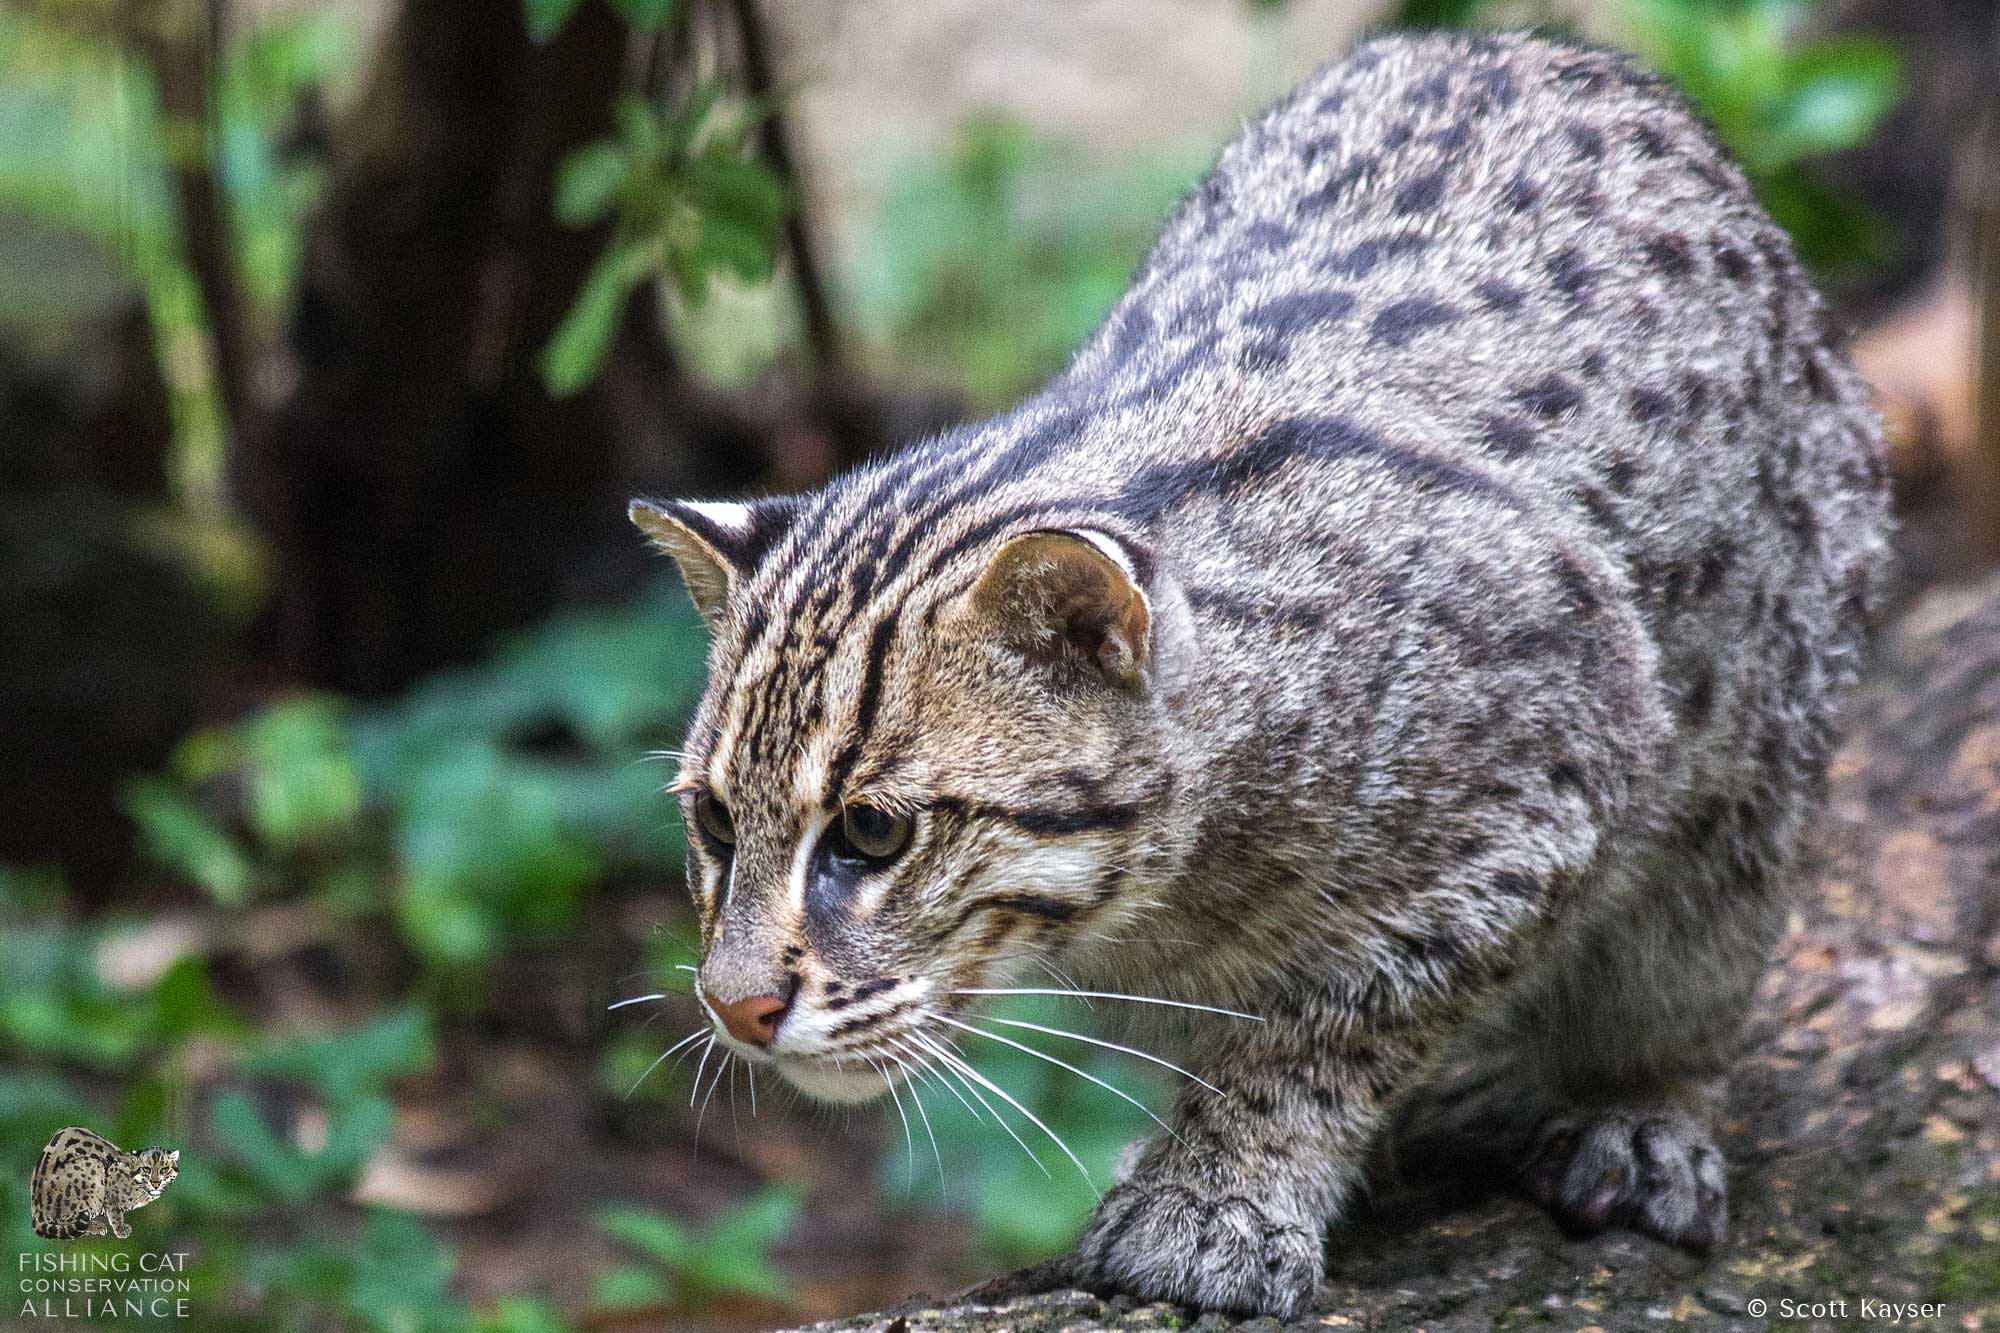 Fishing Cat Conservation Alliance